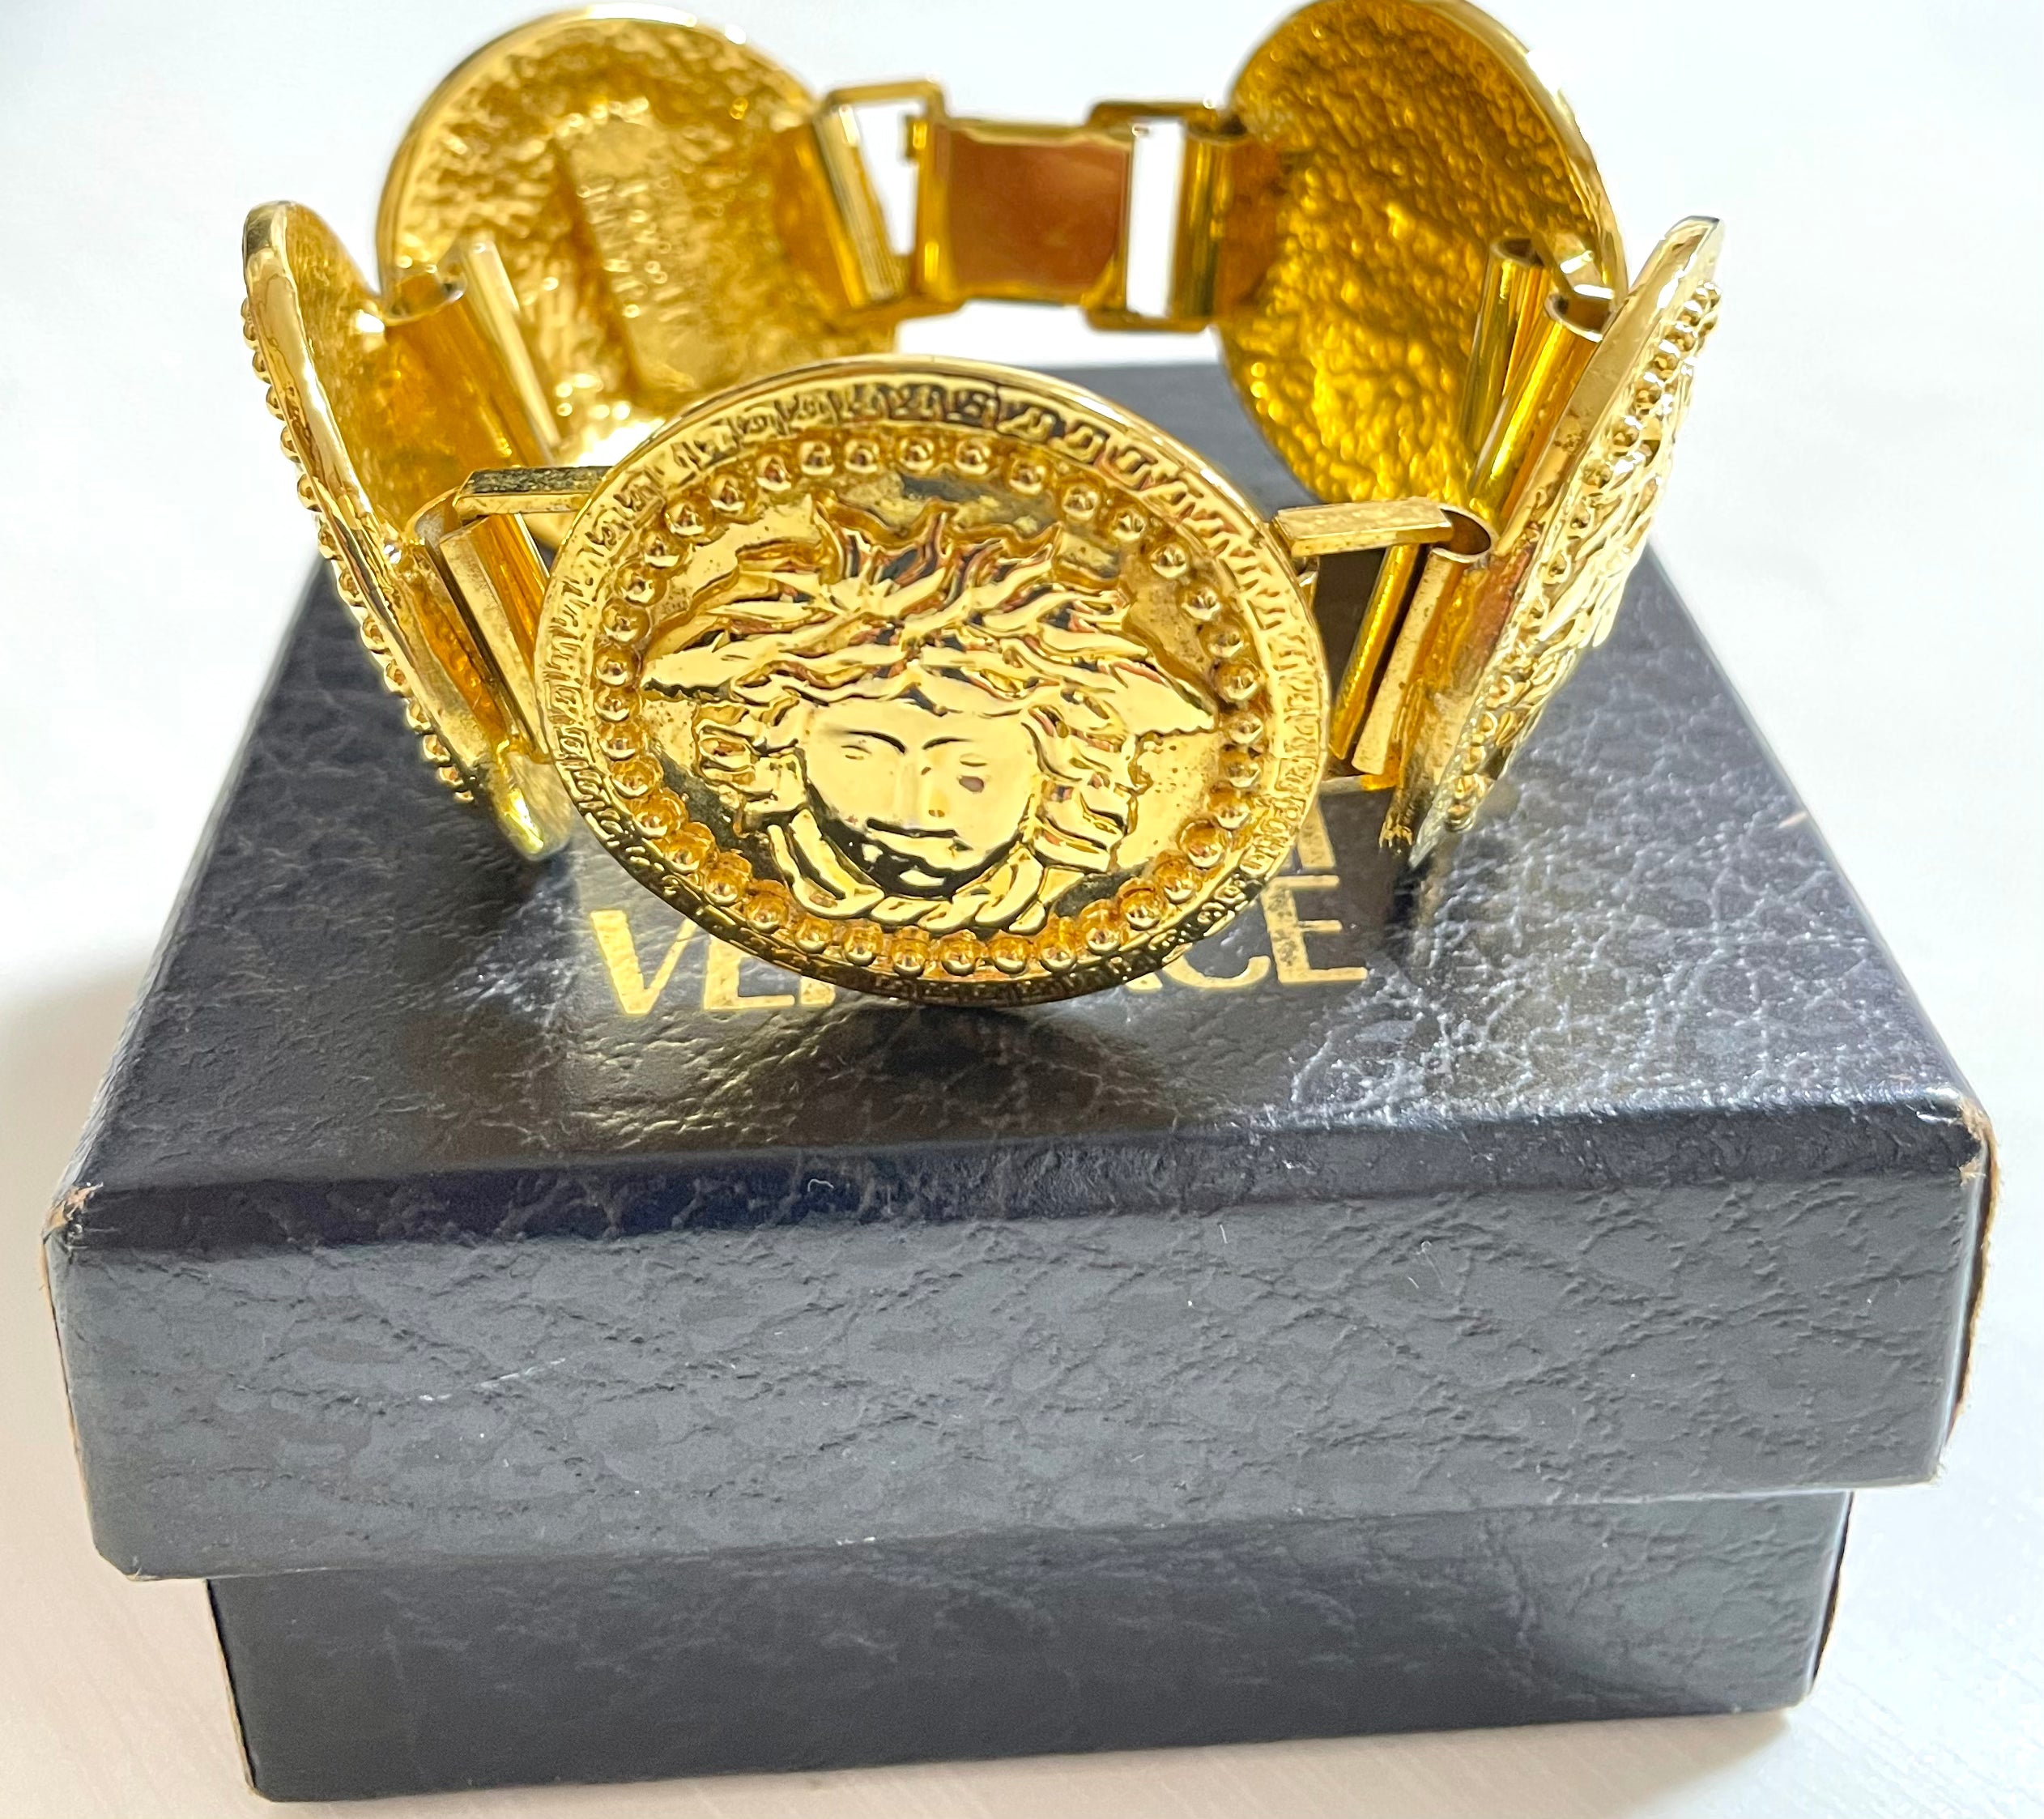 Vintage Gianni Versace gold tone medusa face motif bracelet. Must have Lady Gaga style jewelry piece. Great gift. 050525ra1